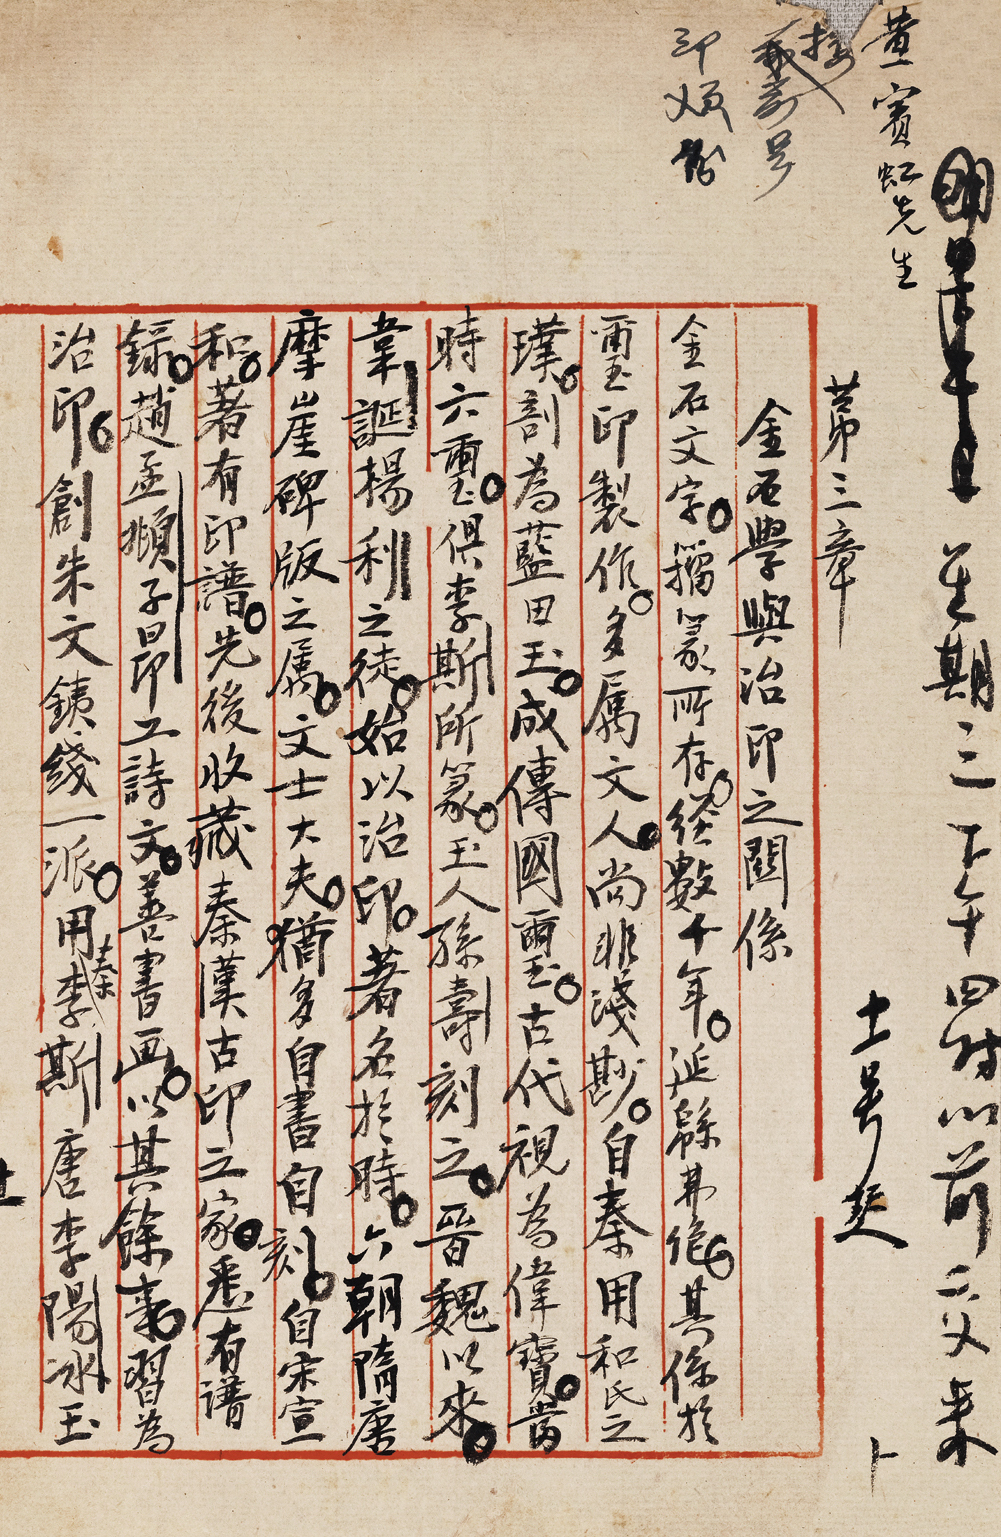 In 1928, Huang Binhong Guangxi Summer Lectures Association's lectures on epigraphy "Chapter 3 The Relationship between Epigraphy and Seal Management" Manuscript (part)